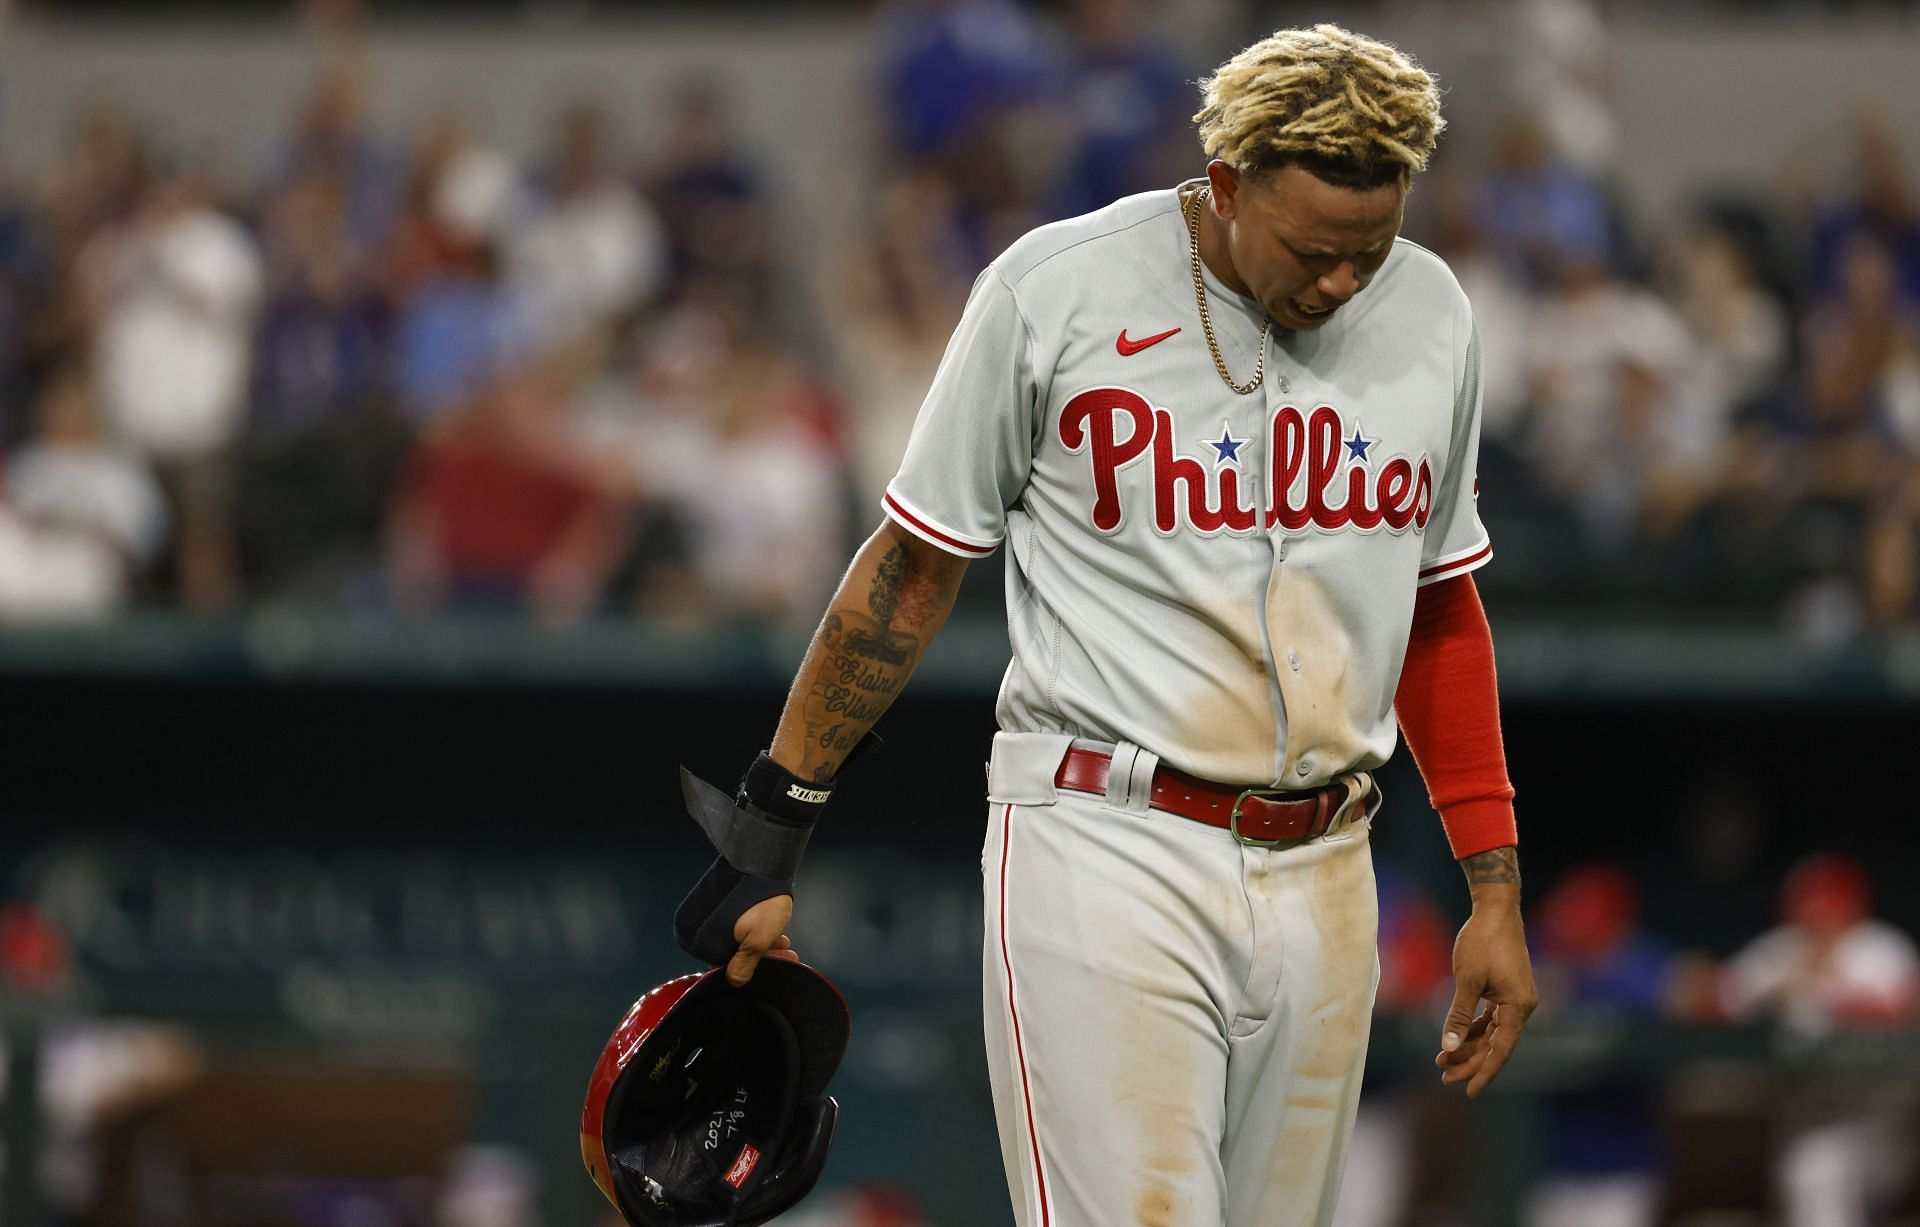 The Philadelphia Phillies have lost three straight games after suffering a 4-2 defeat to the Texas Rangers this afternoon.